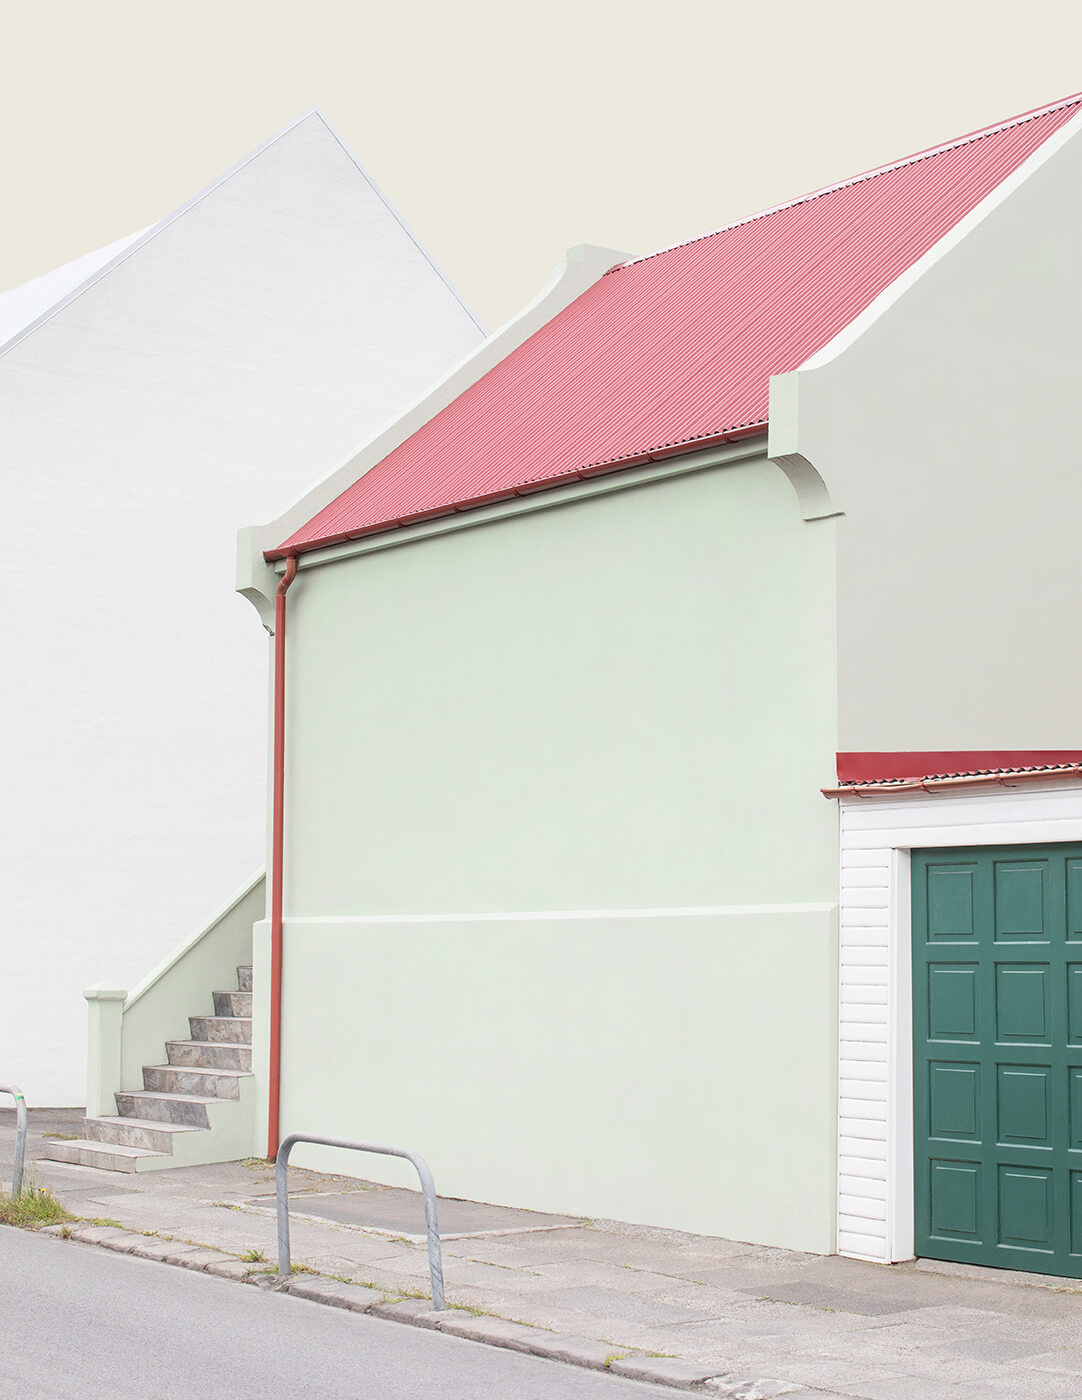 A minimalistic architectural image of a building with a red roof in Iceland